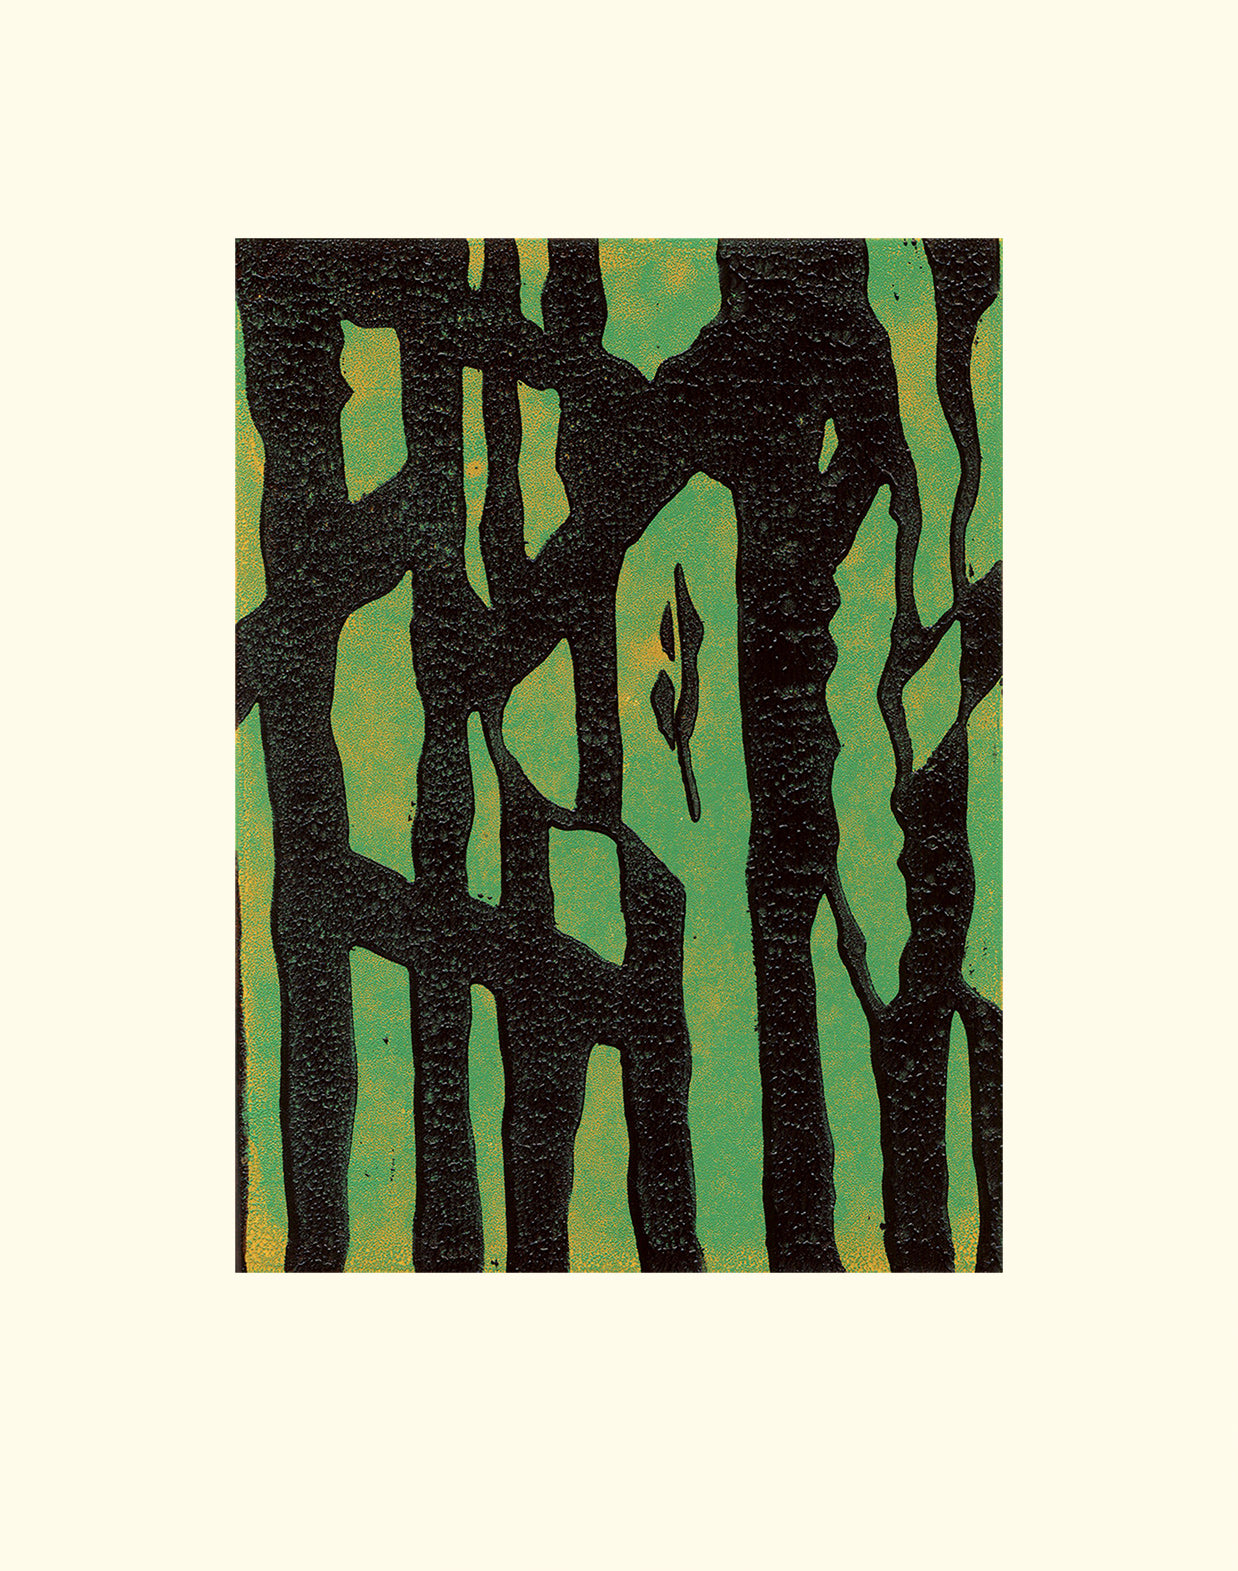 Out In The Woods - Lino print 08